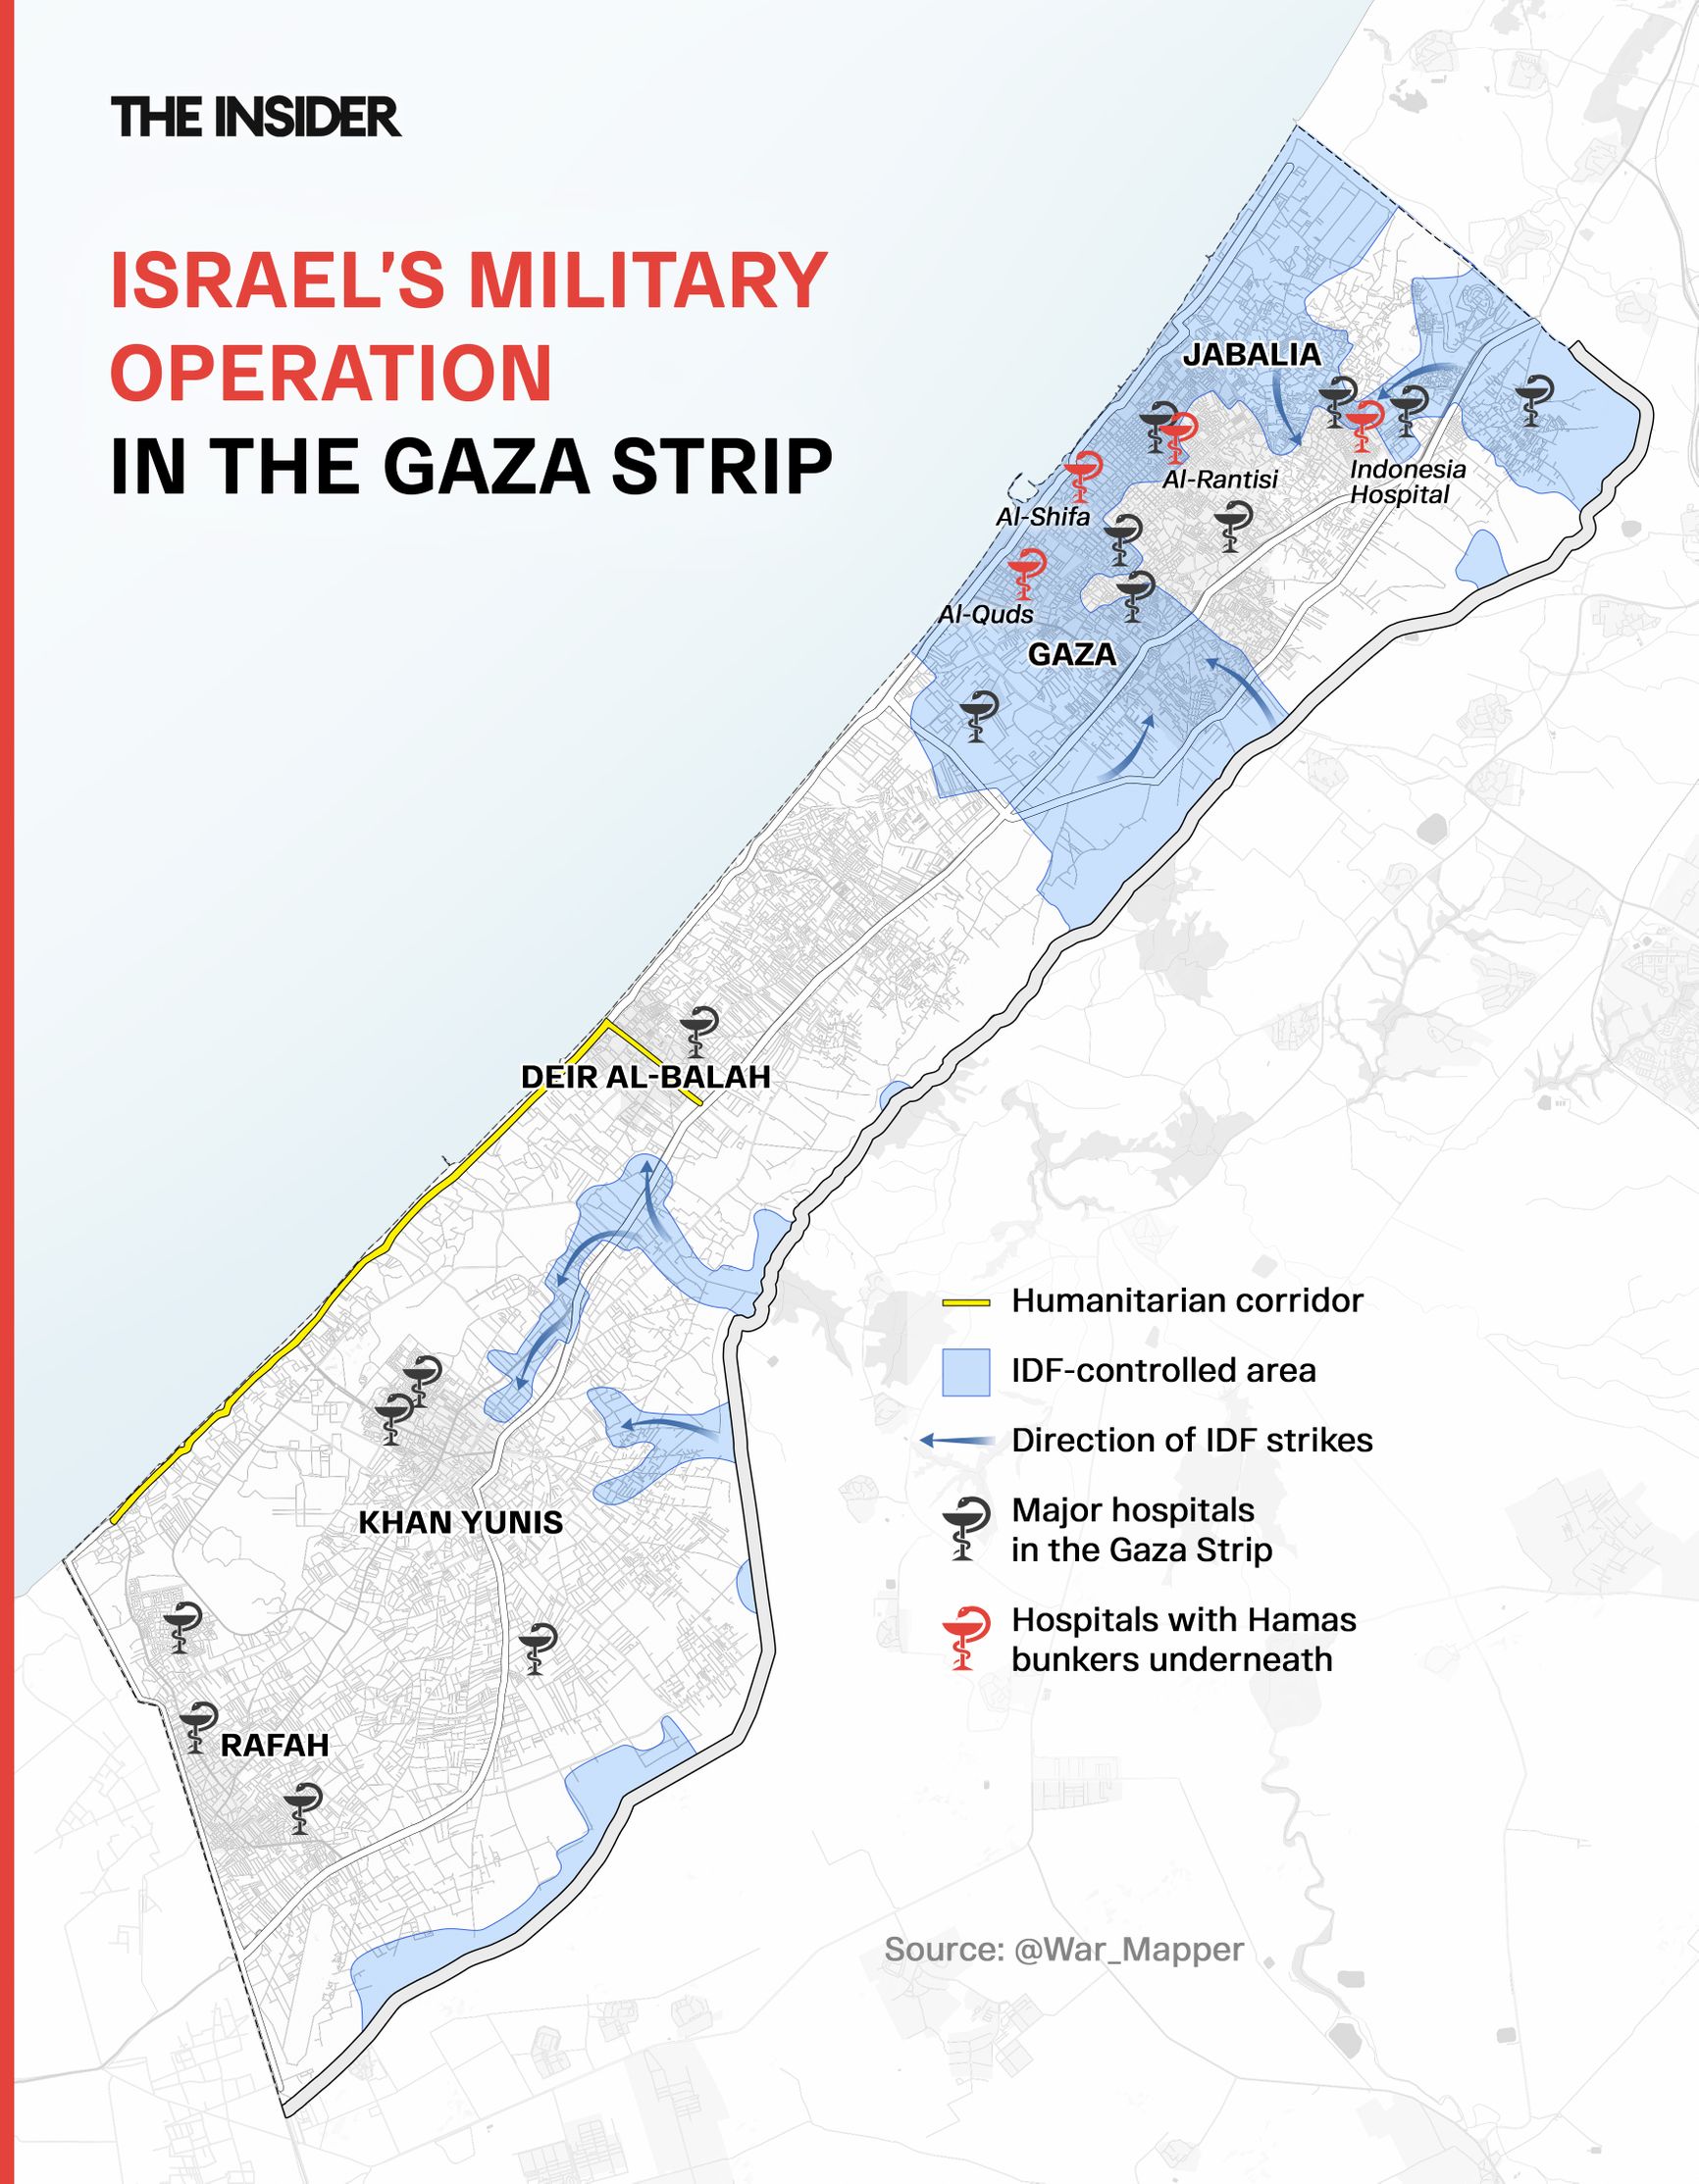 Israel's military operation in the Gaza Strip